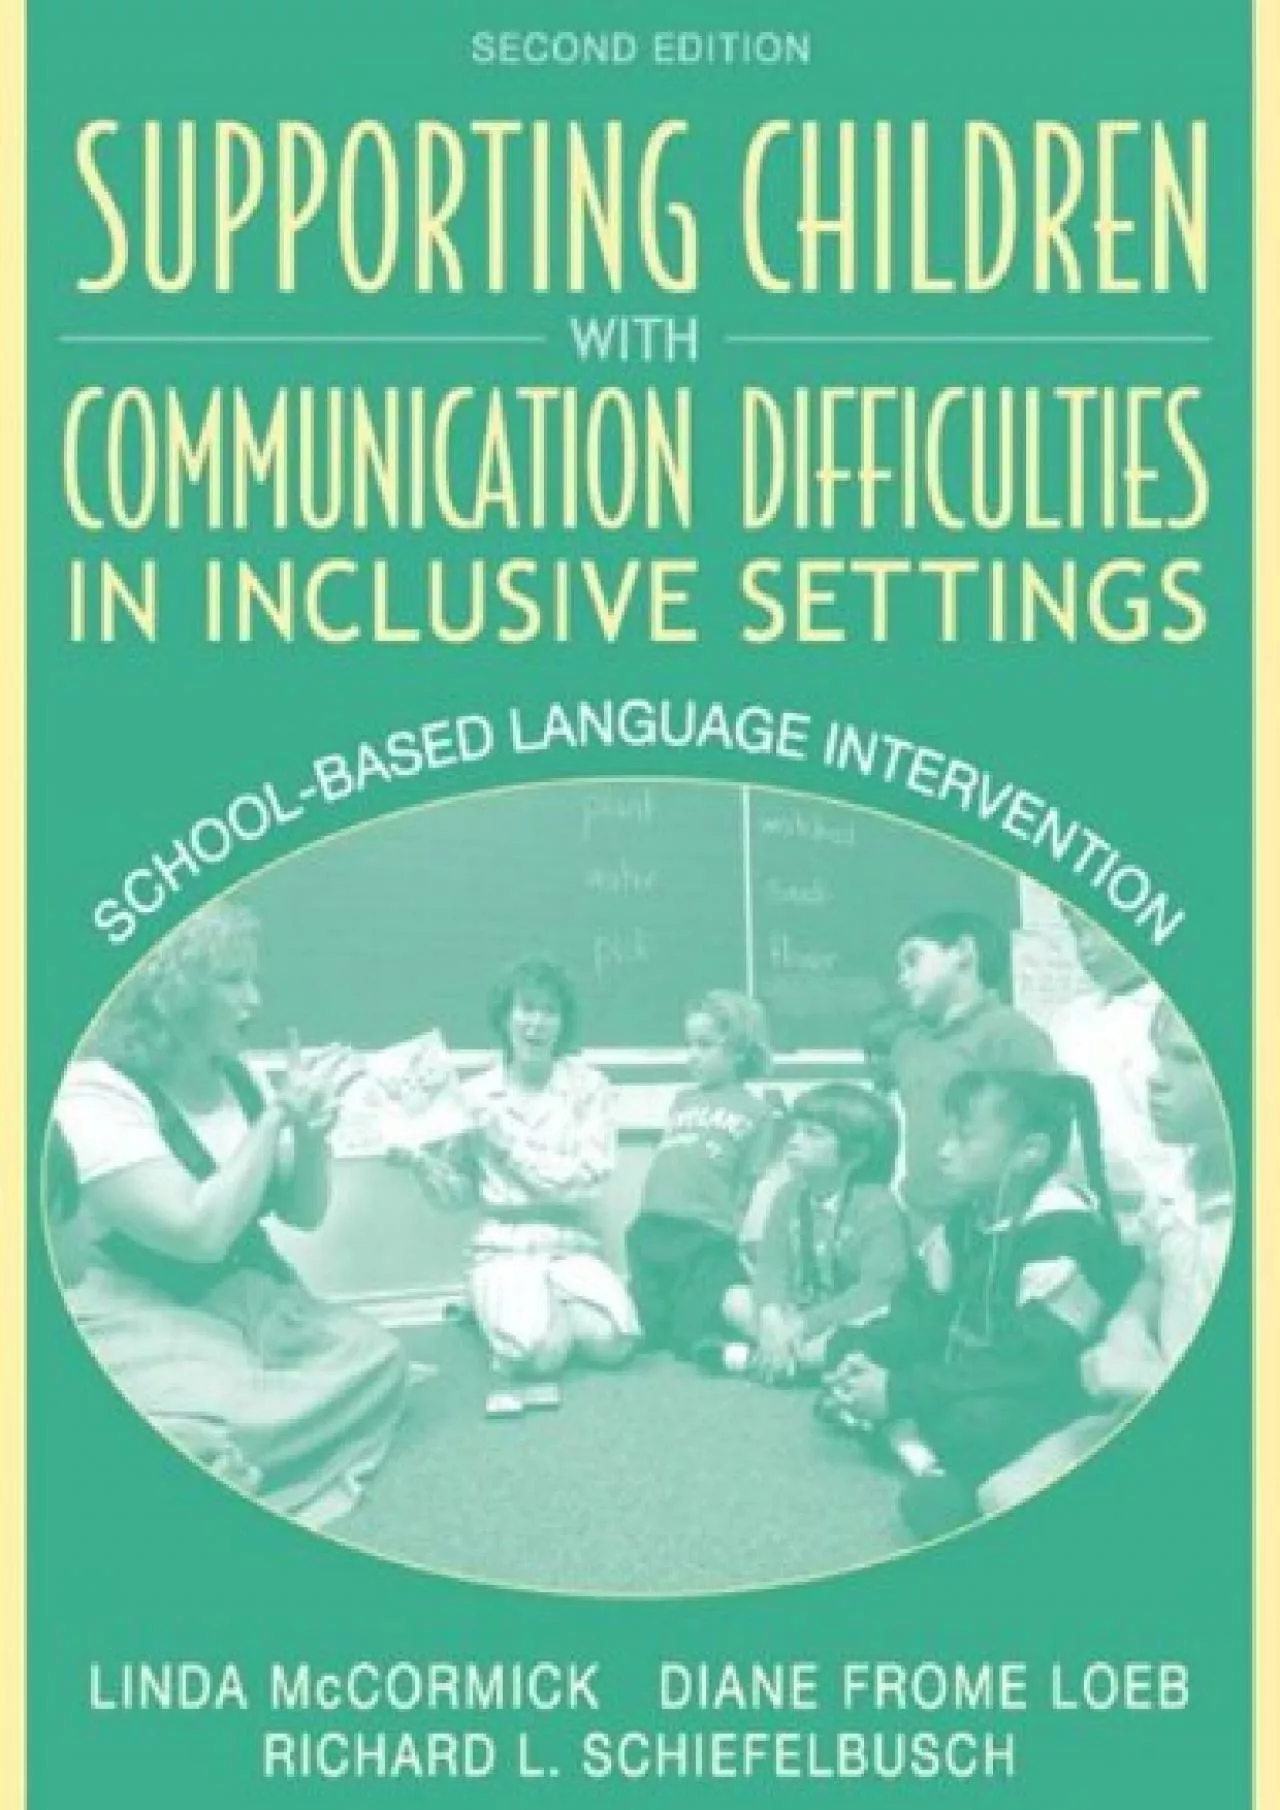 (DOWNLOAD)-Supporting Children with Communication Difficulties in Inclusive Settings: